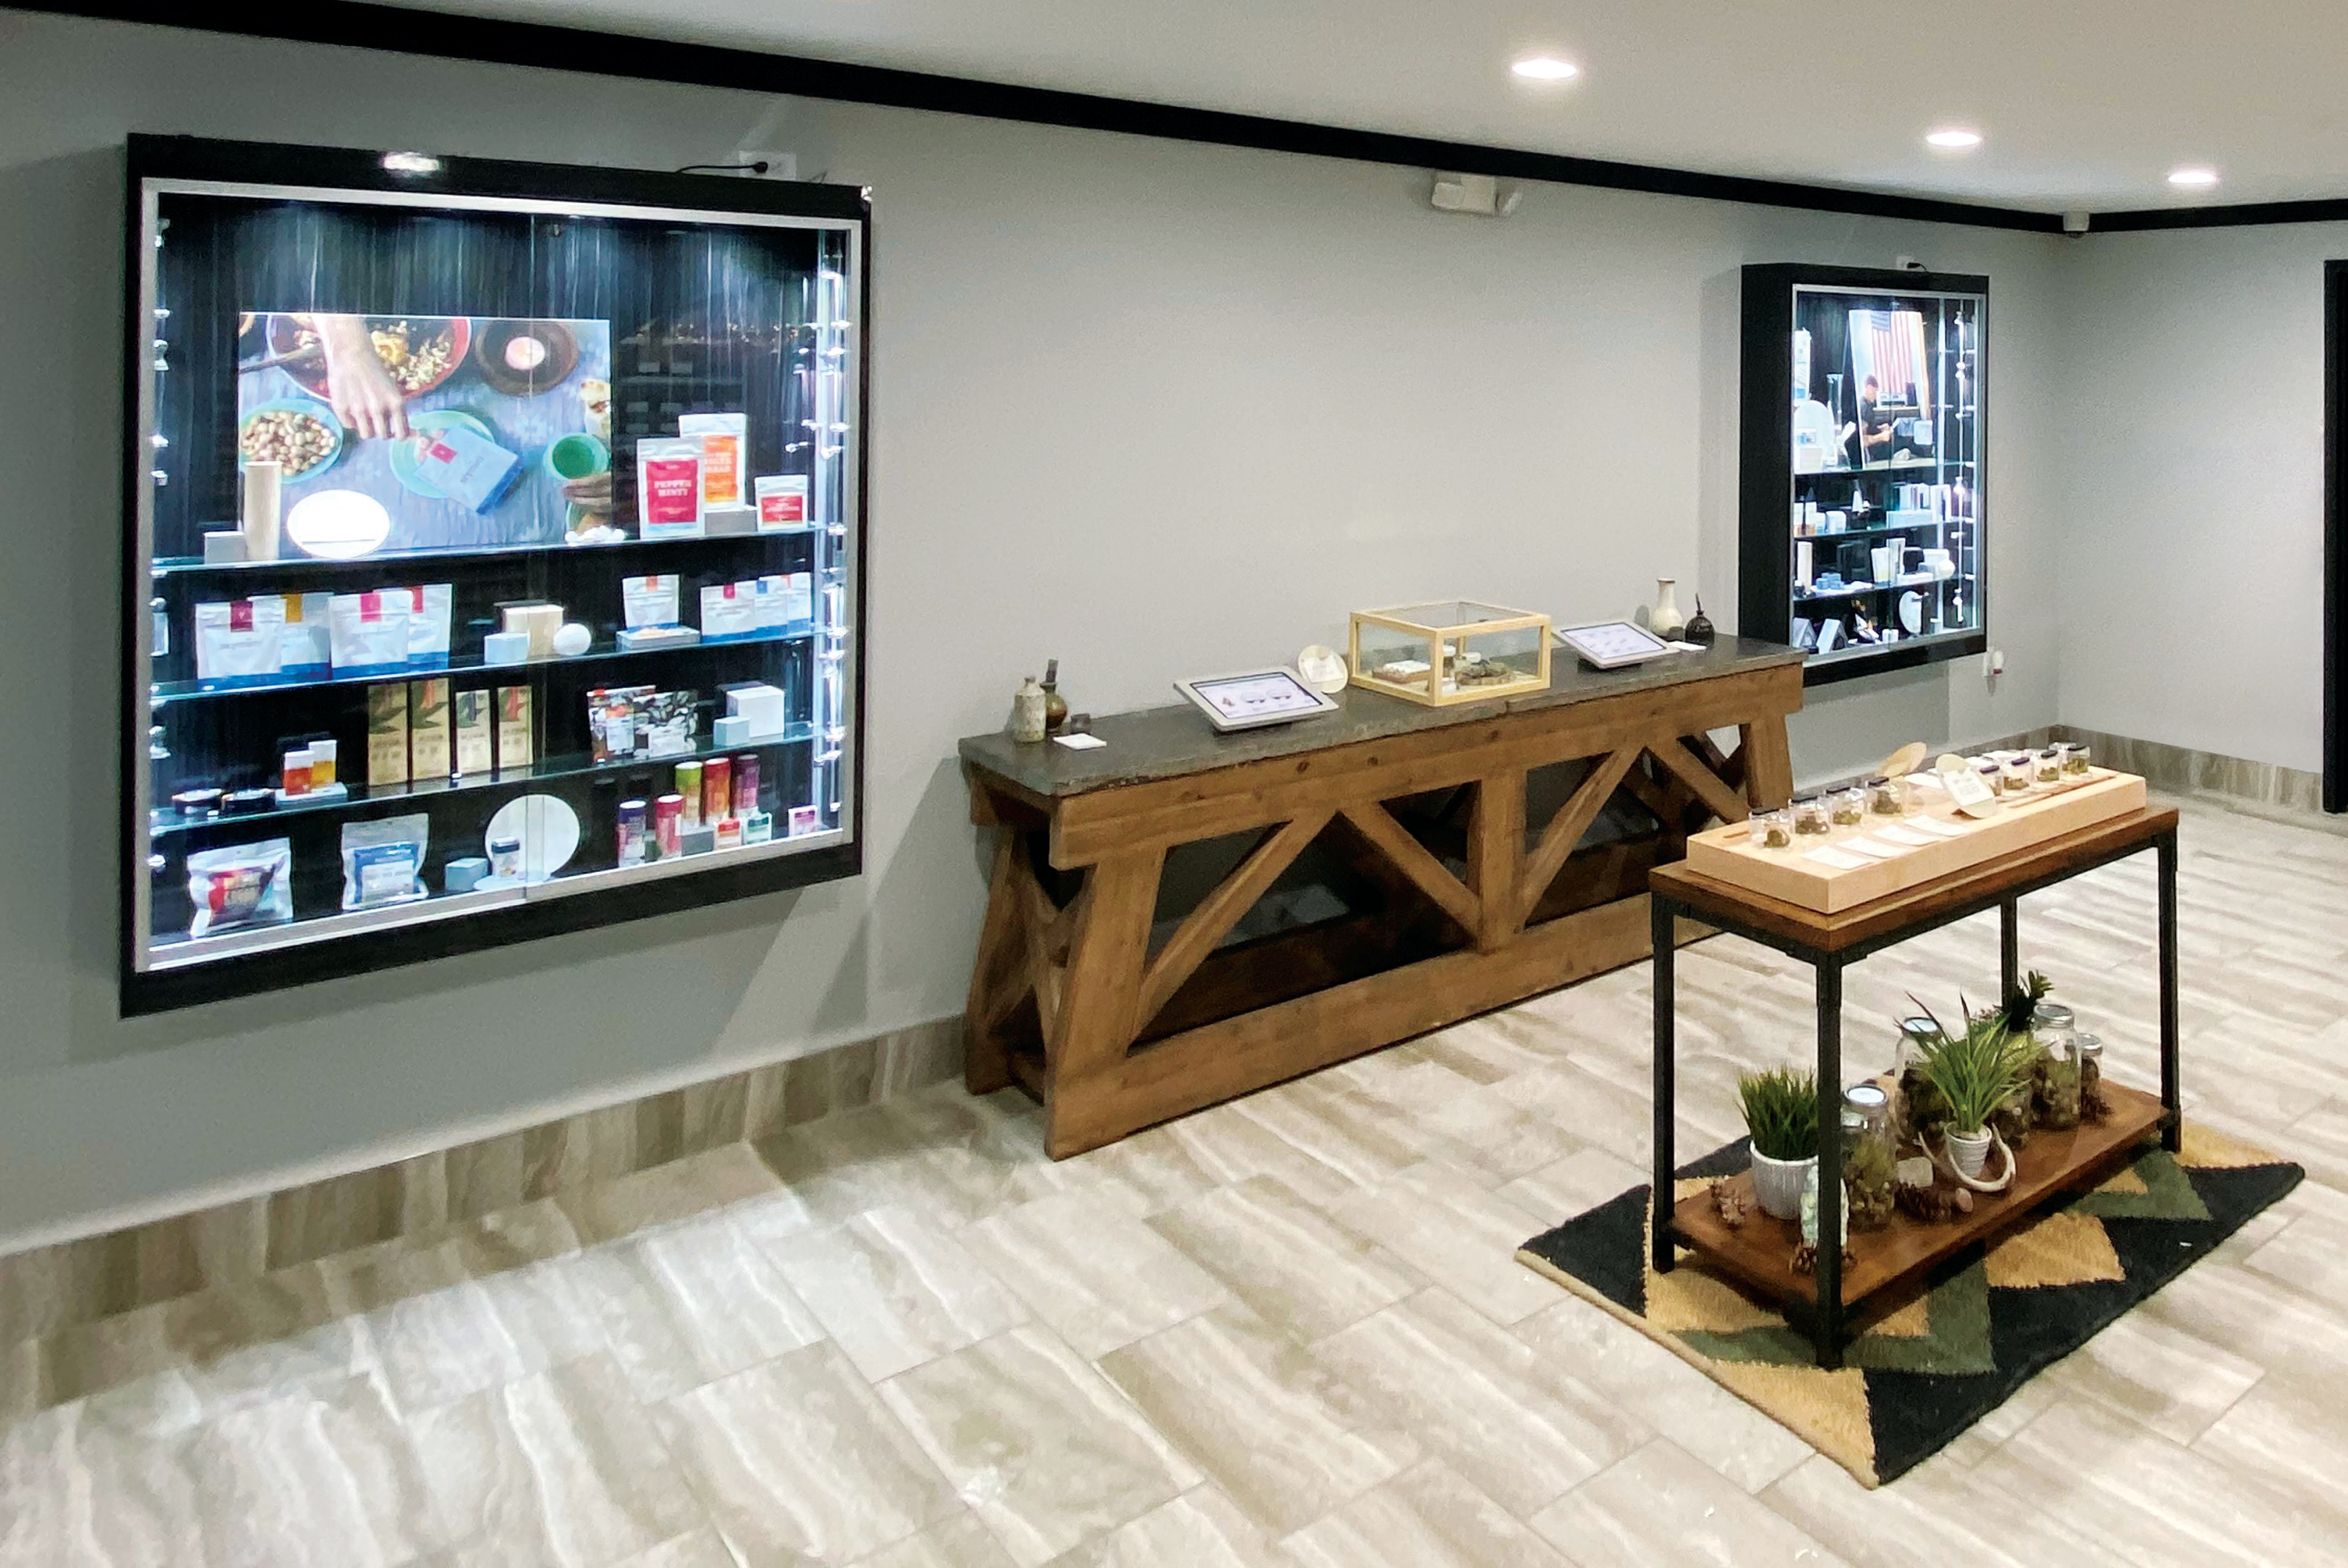 Green Peak Innovations Expands Cannabis Retail To West Michigan: &#39;We Take A Measured Approach&#39;